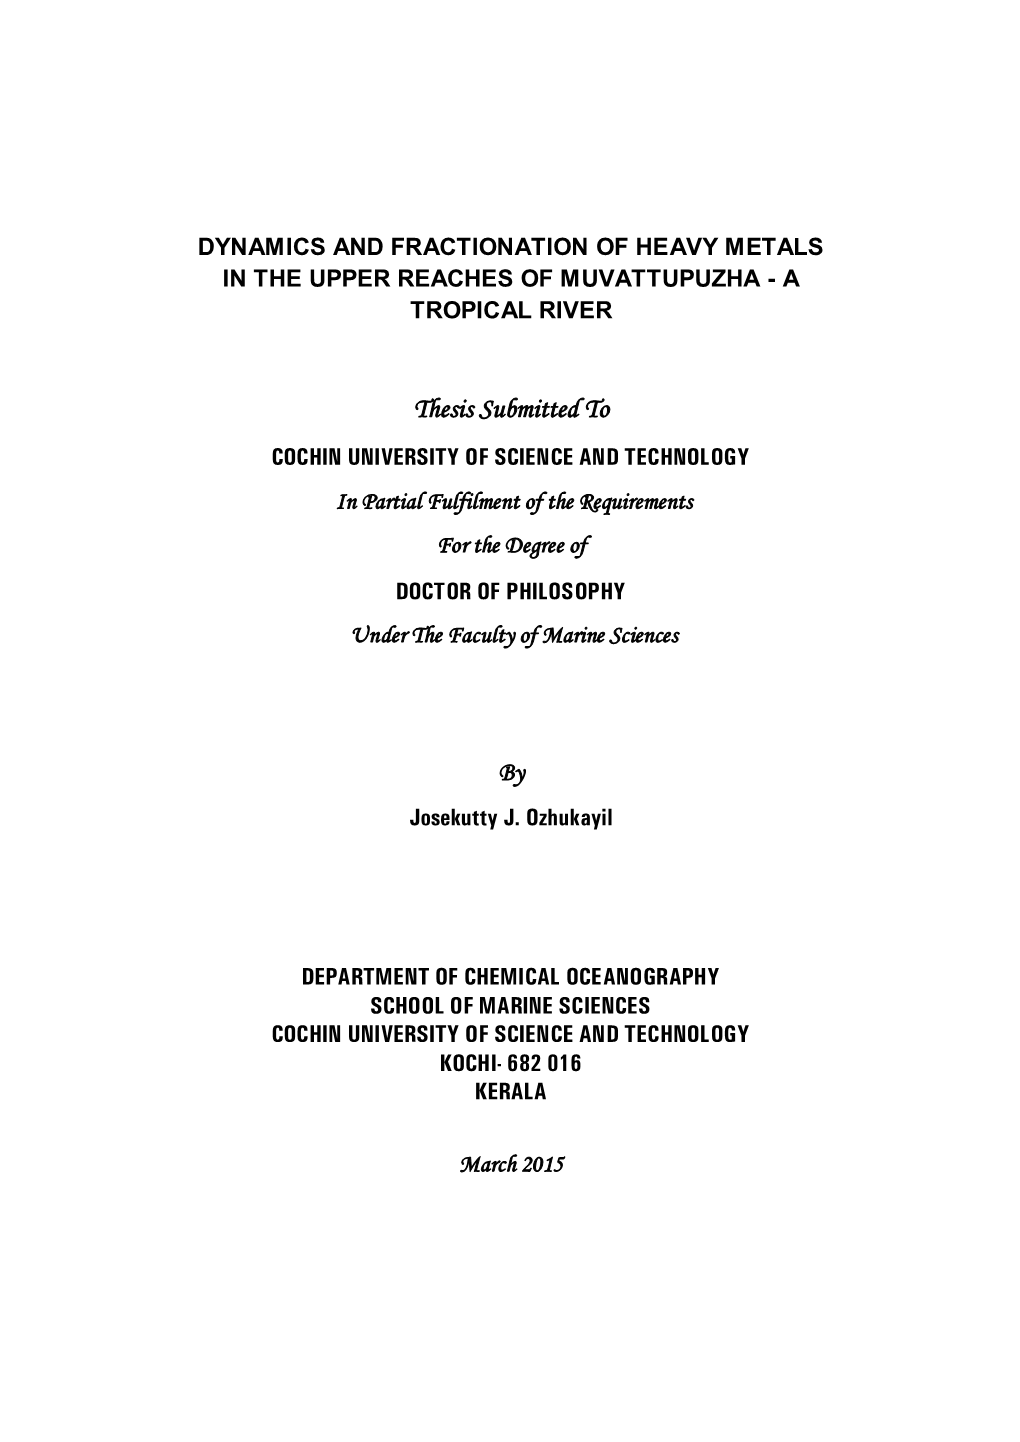 Dynamics and Fractionation of Heavy Metals in the Upper Reaches of Muvattupuzha-A Tropical River